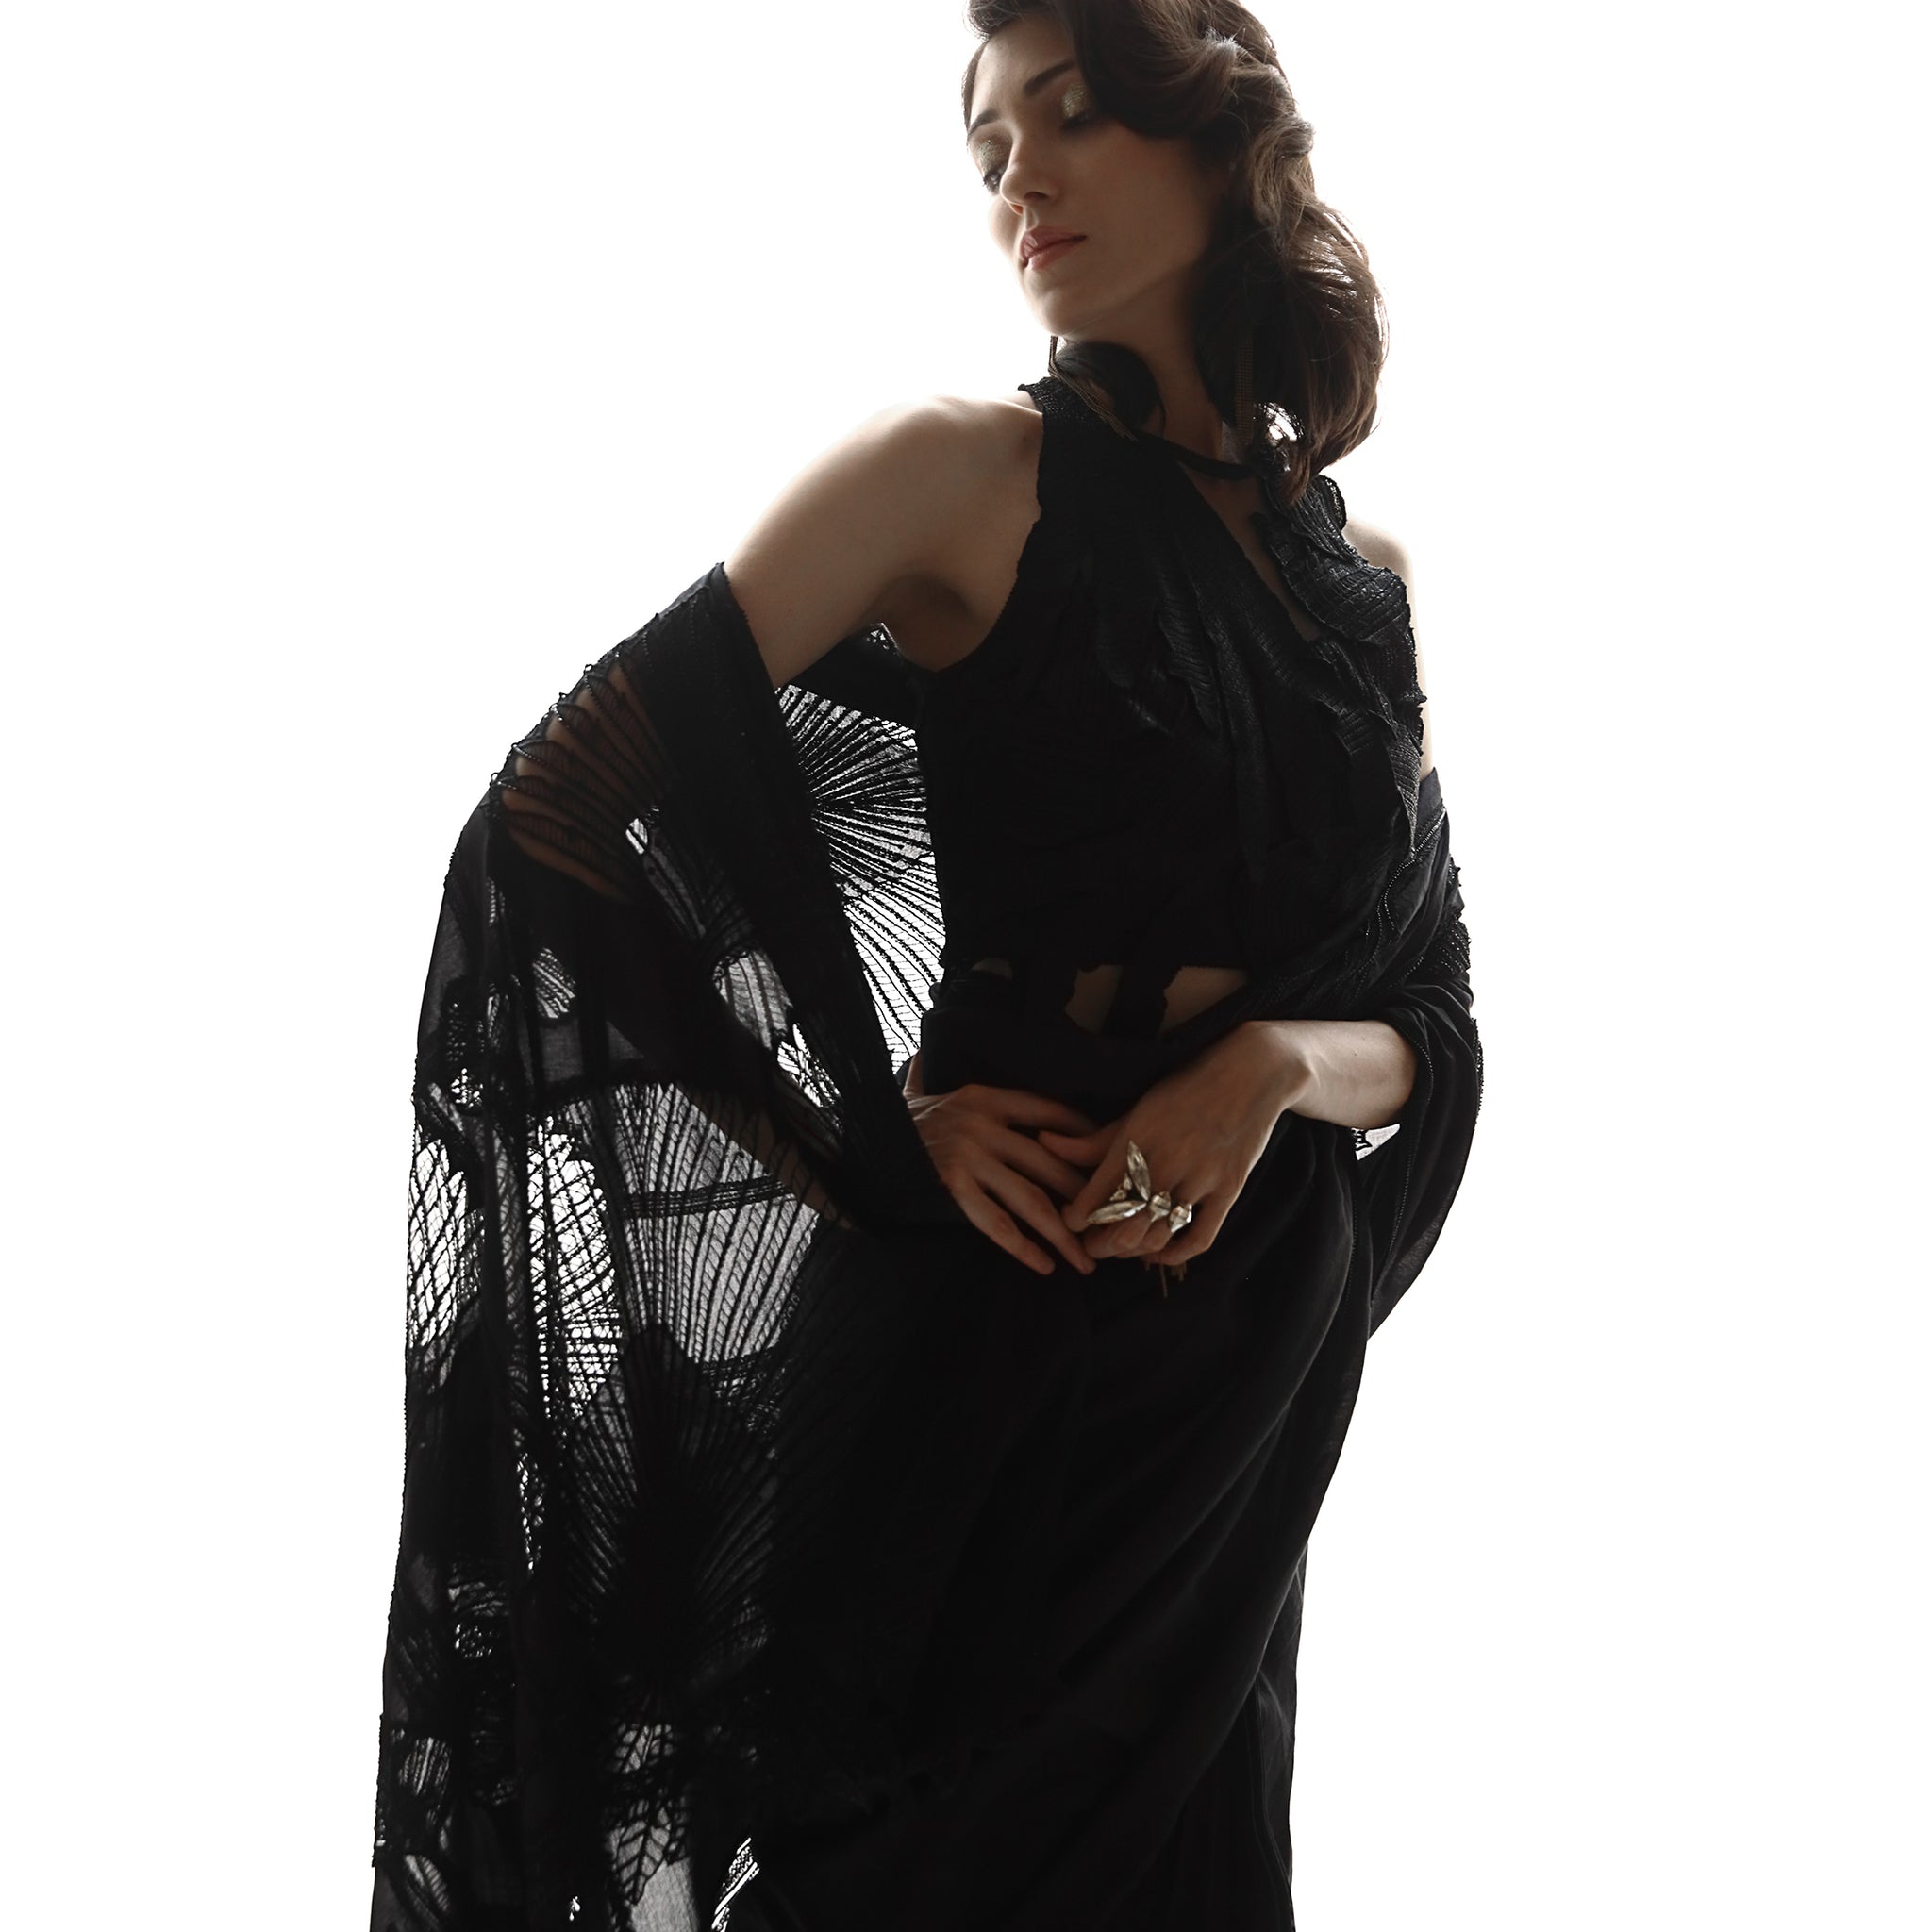 Chanderi Saree with fine Resham and net applique placement embroidery creating a beautiful balance between elegance and style. There is an interesting play of 3D textured draped embroidered blouse balancing the floral feel of the saree making it a  perfect pick for the evening. #Abhishekstudio #abhisheksharma  #fashiondesignerabhisheksharma #designerware #ambawattaone #lakmefashionweek #Saree